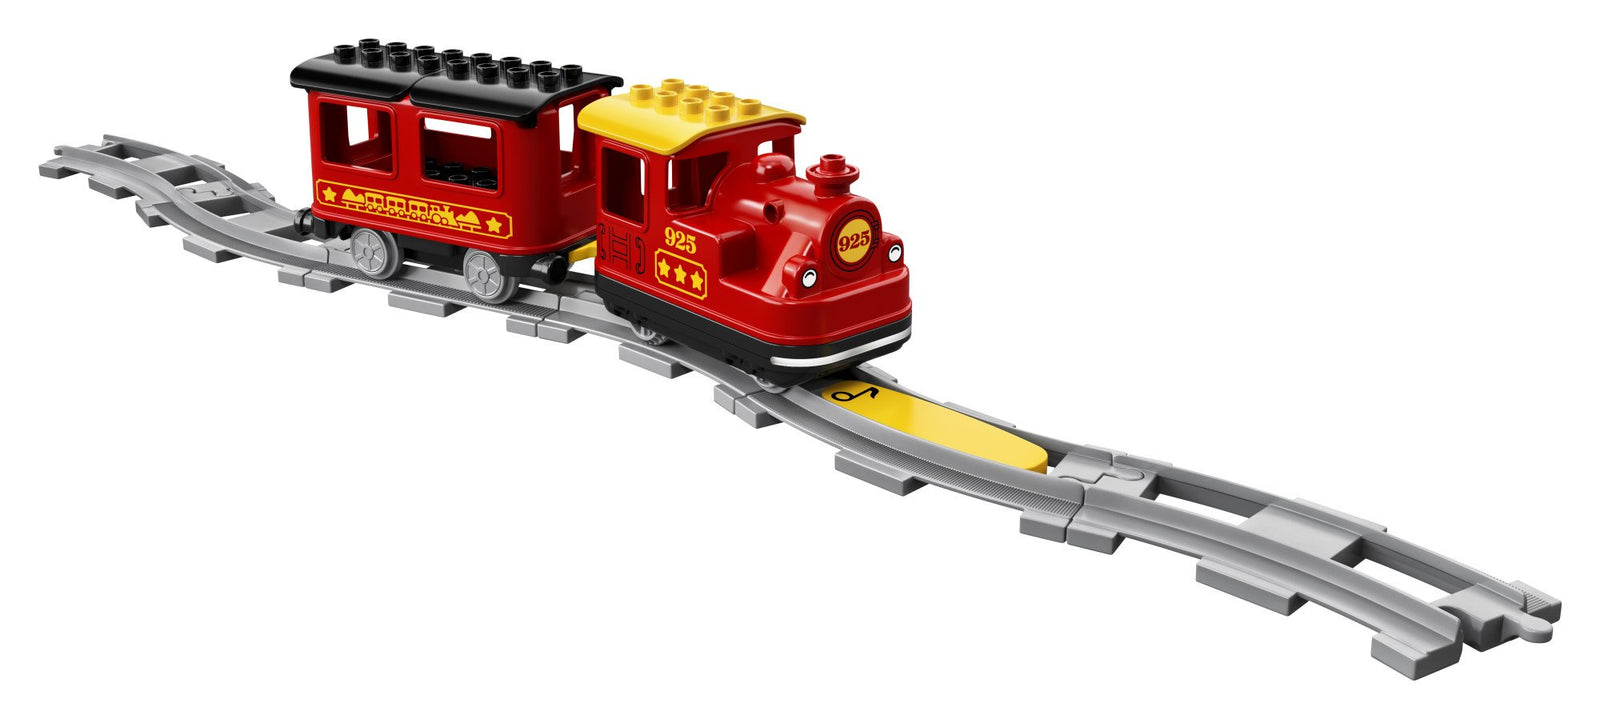 LEGO DUPLO Steam Train 10874 Remote-Control Building Blocks Set Helps Toddlers Learn, Great Educational Birthday Gift (59 Pieces)